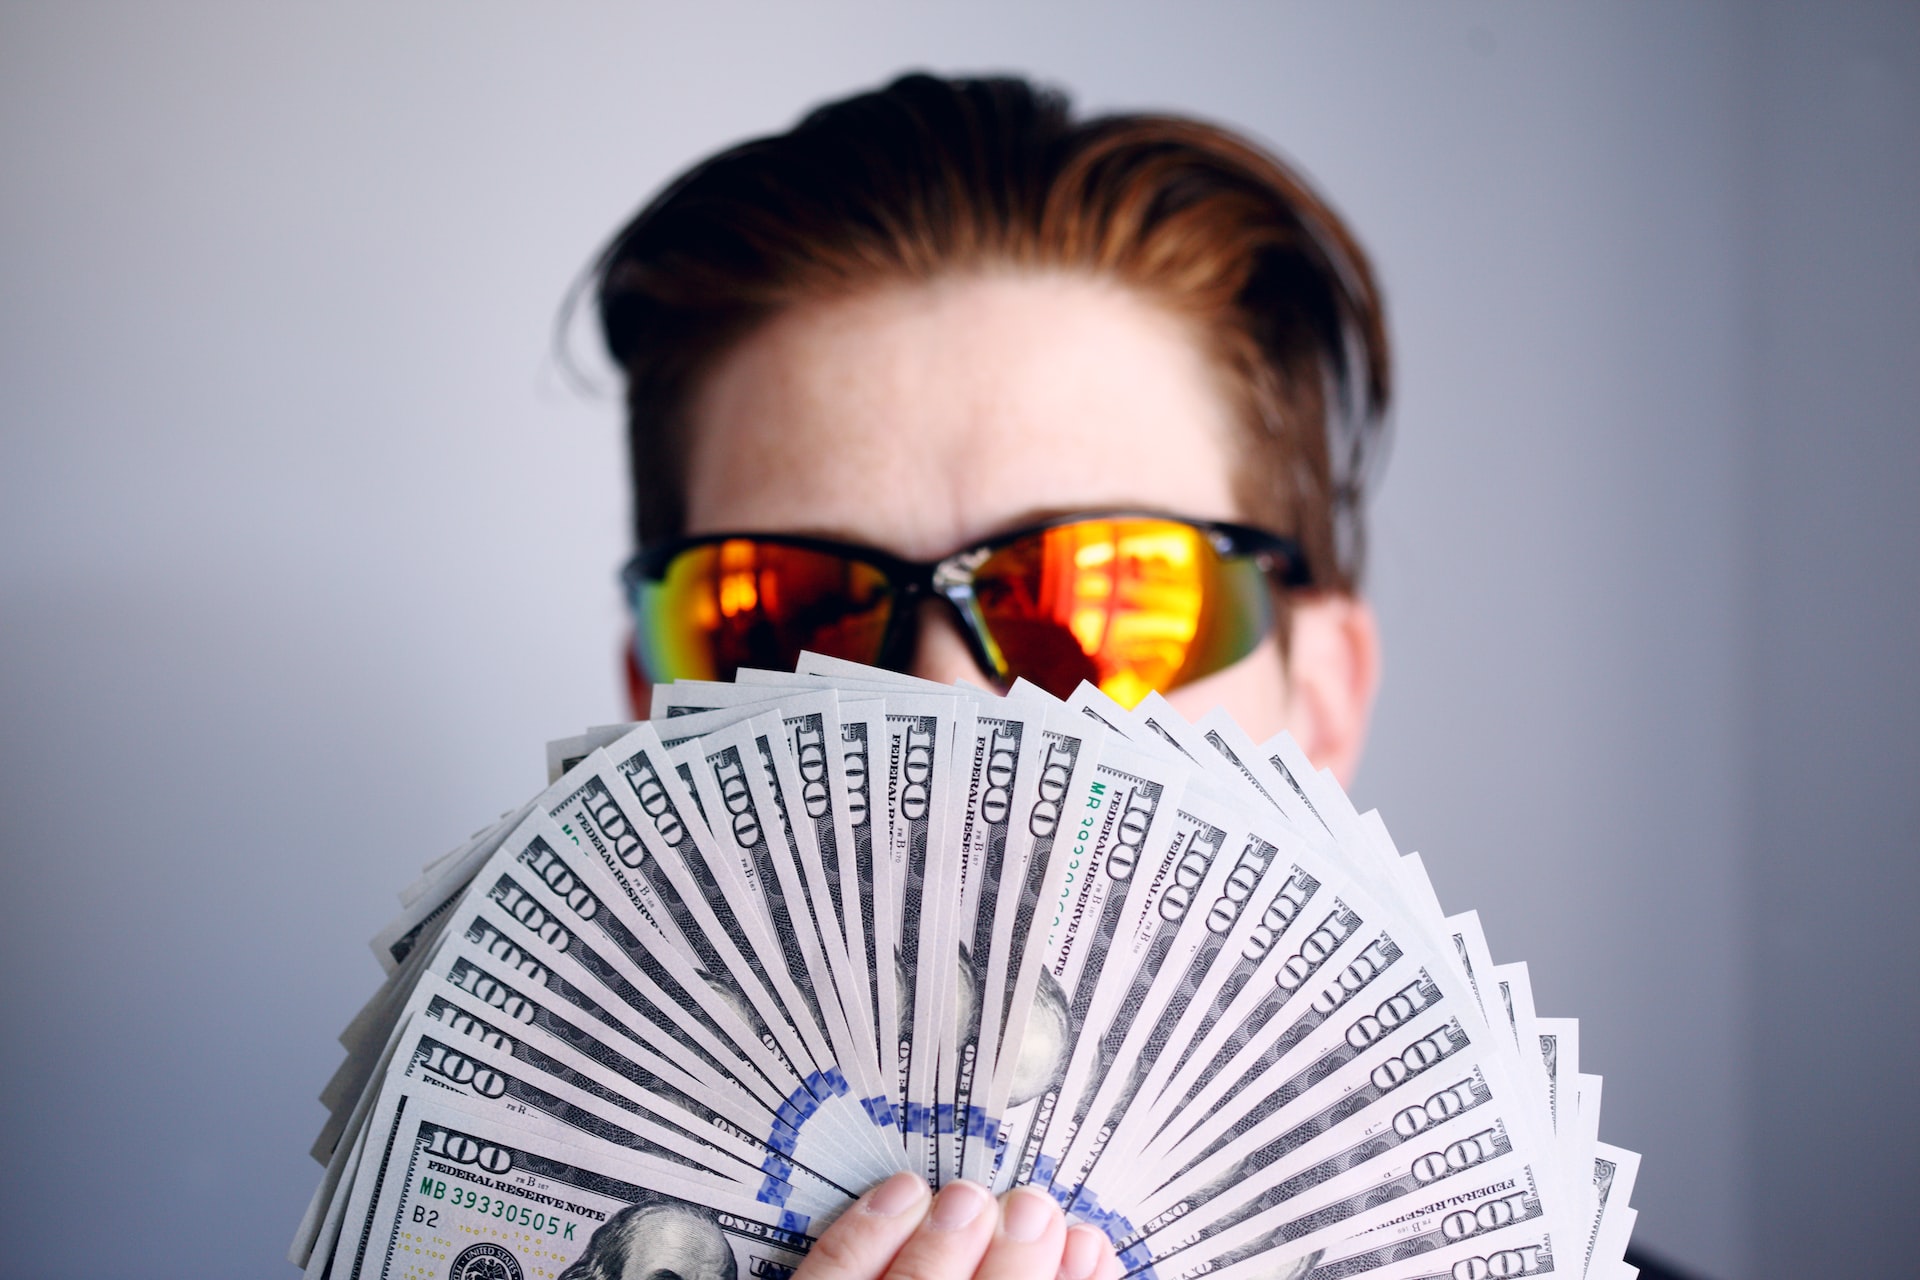 Person with sunglasses holding lots of money.